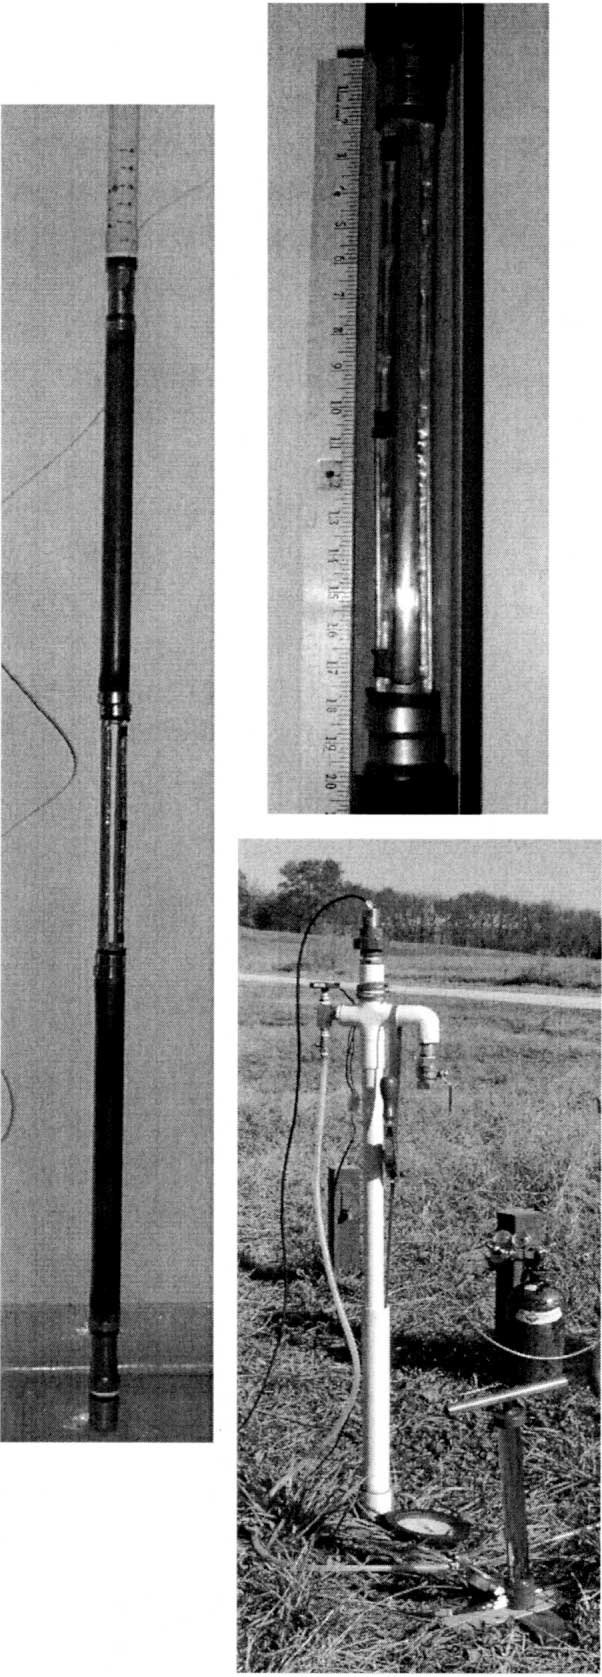 Photos of equipment used in this experiment.